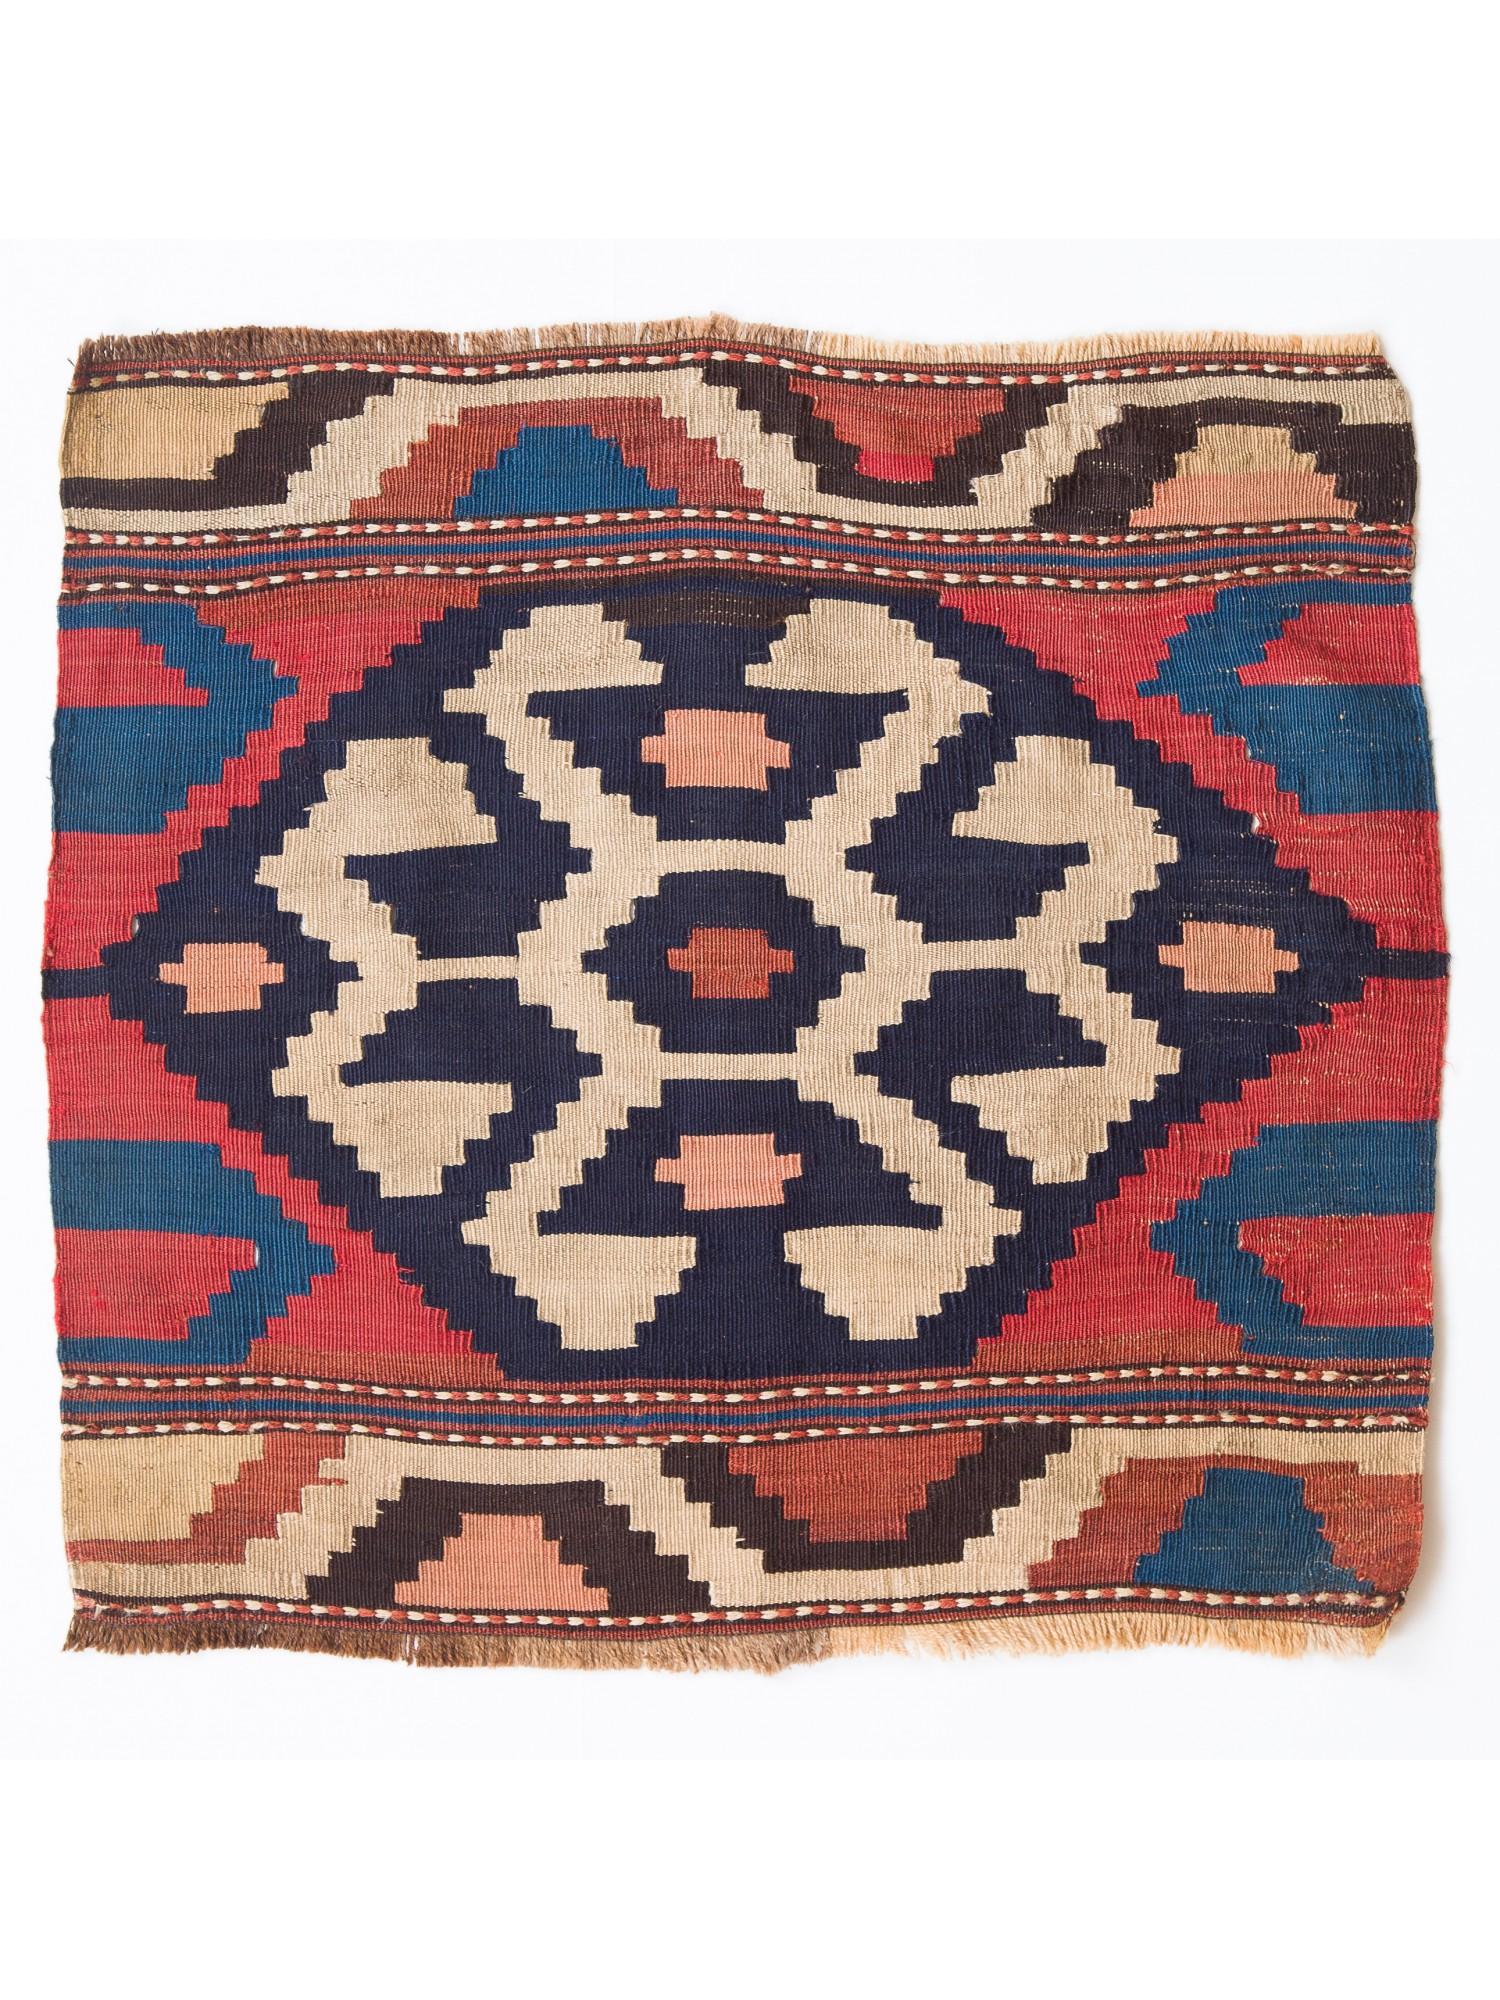 Hand-Woven Antique Early 20th Century Caucasian Kilim Woven Cradle Part, Natural Dyed For Sale